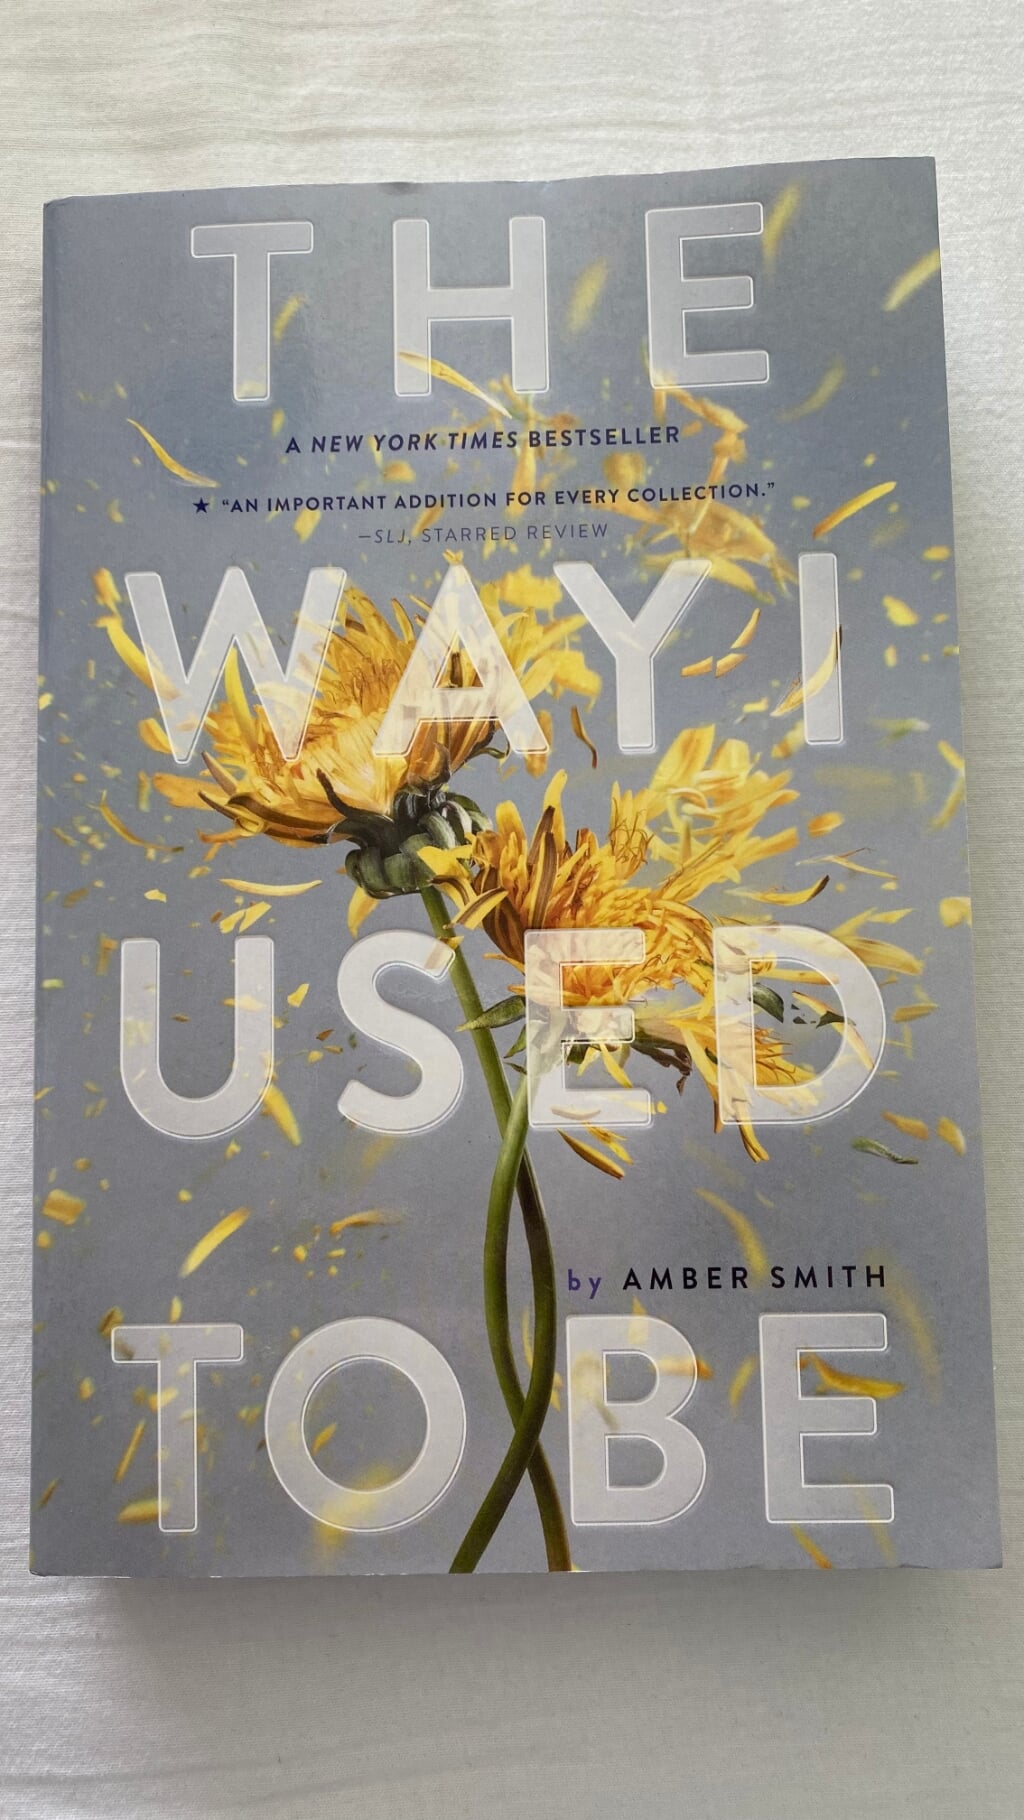 Bestseller ‘The way I used to be’